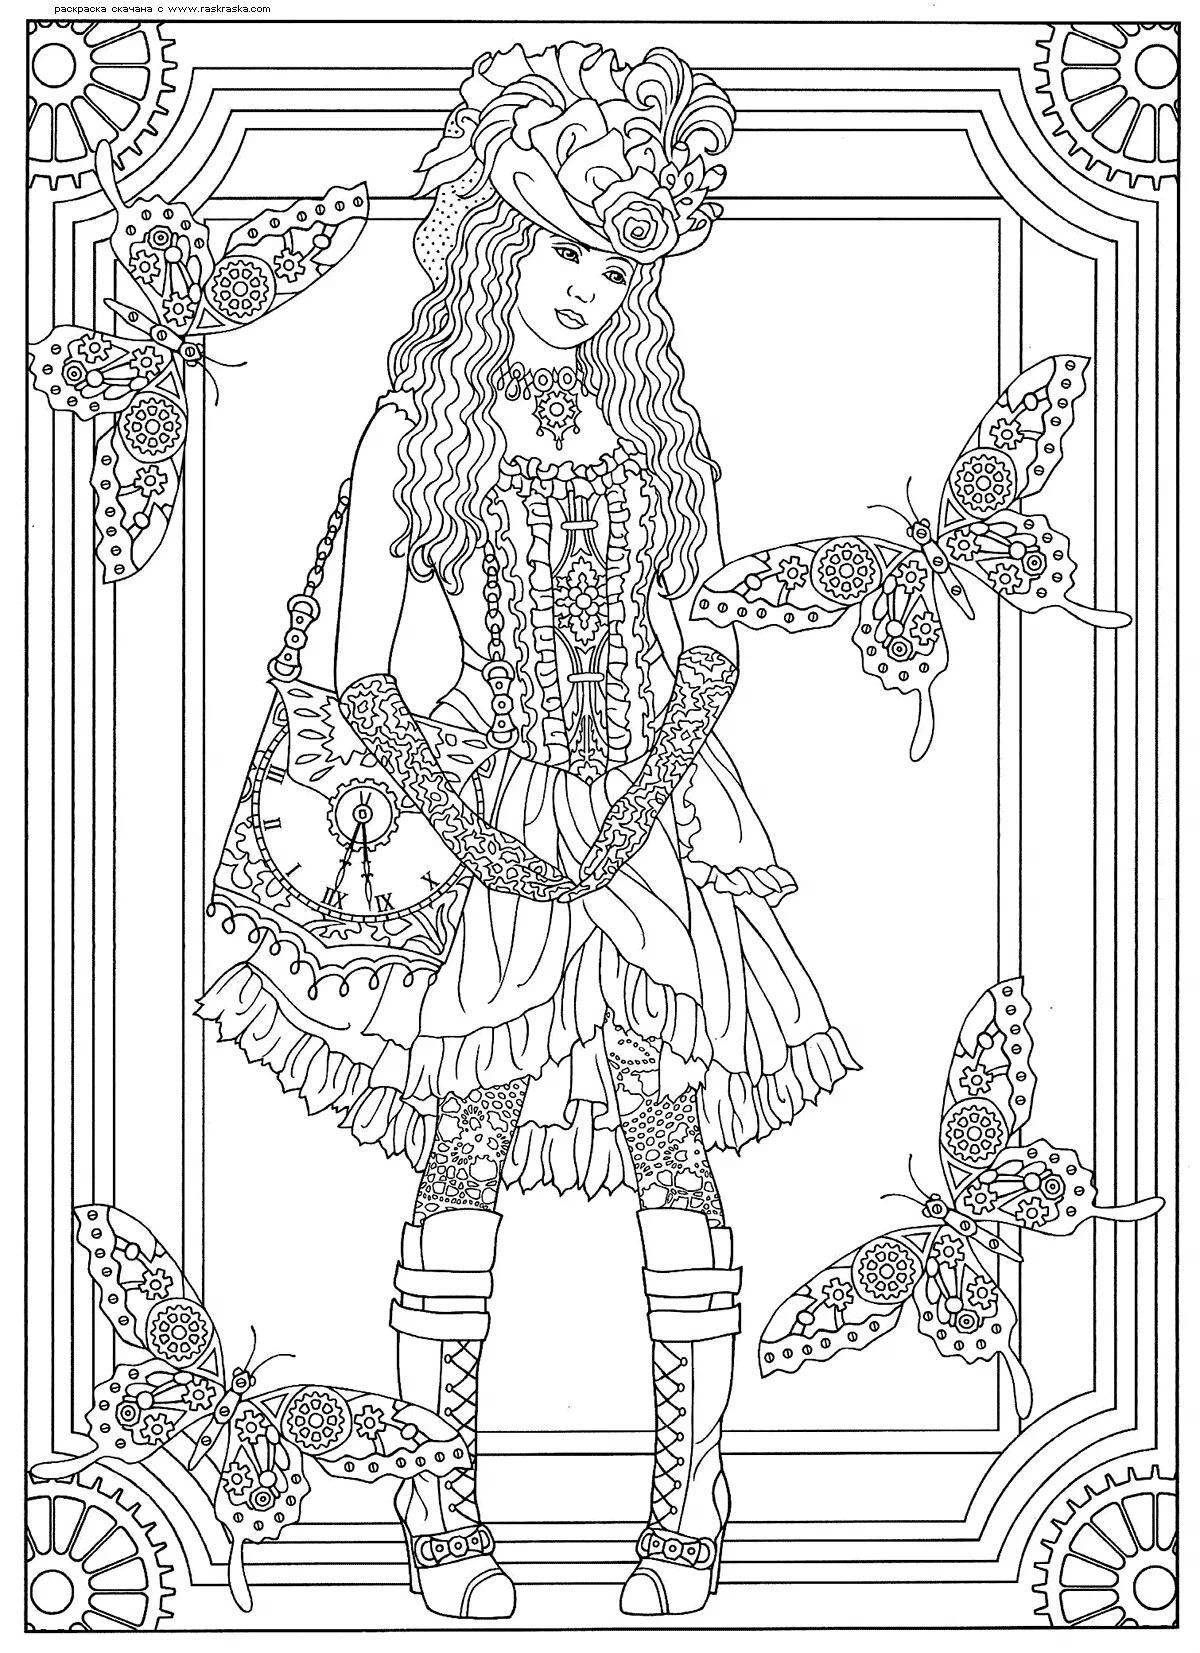 Playful steampunk coloring page